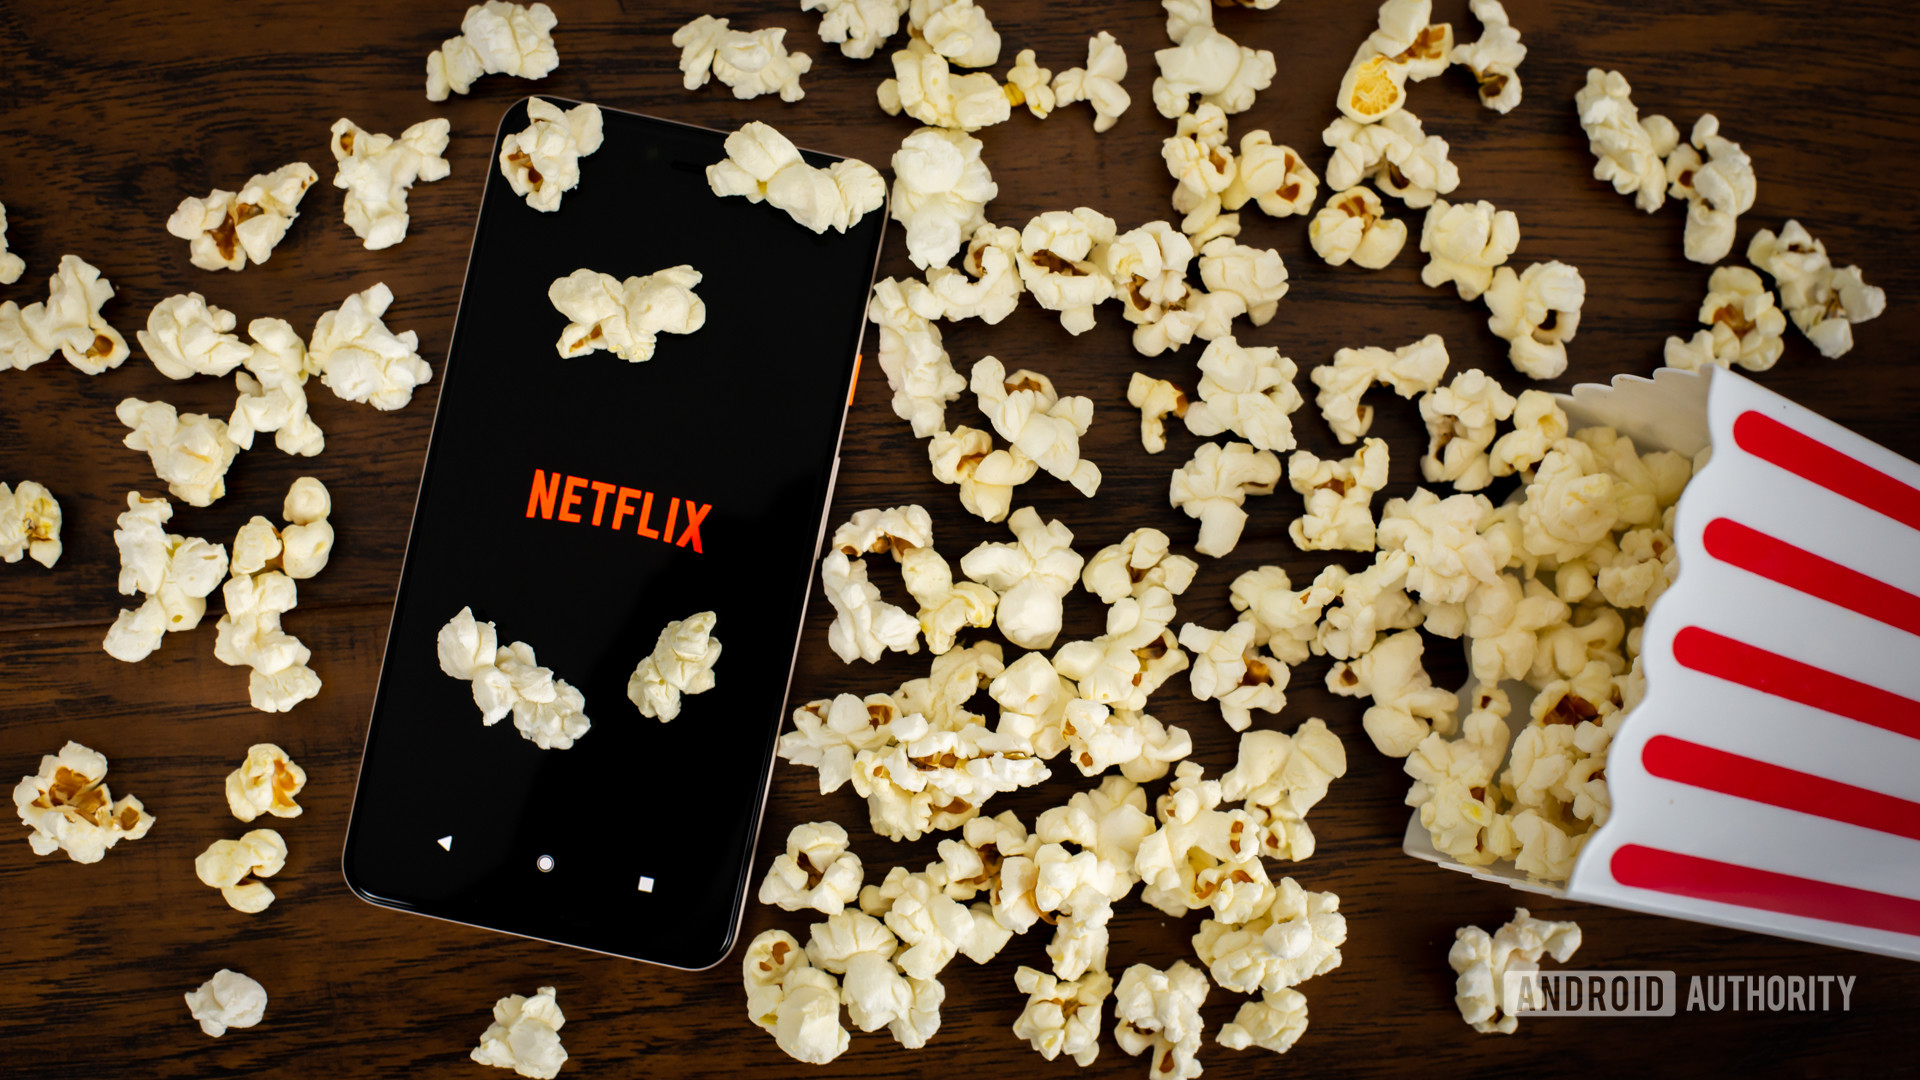 How do Netflix prices differ over countries?